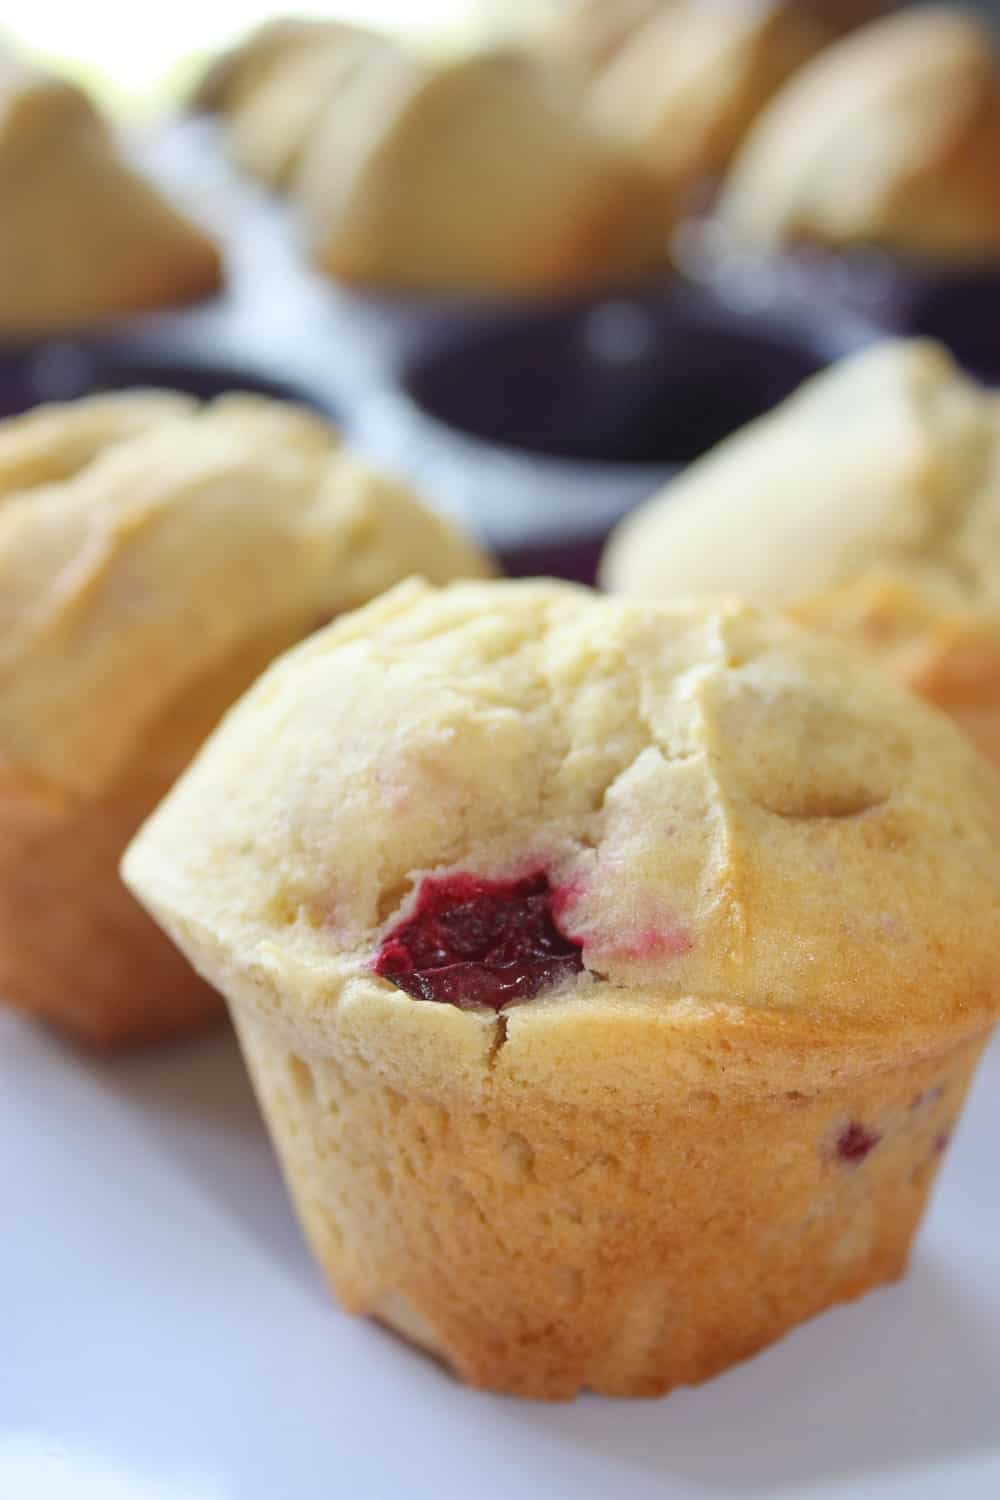 Lemon and cranberry are a winning combination and these muffins do not disappoint!  Eat them warm right out of the oven or save them for later.  These lemon cranberry muffins are a great snack any time.